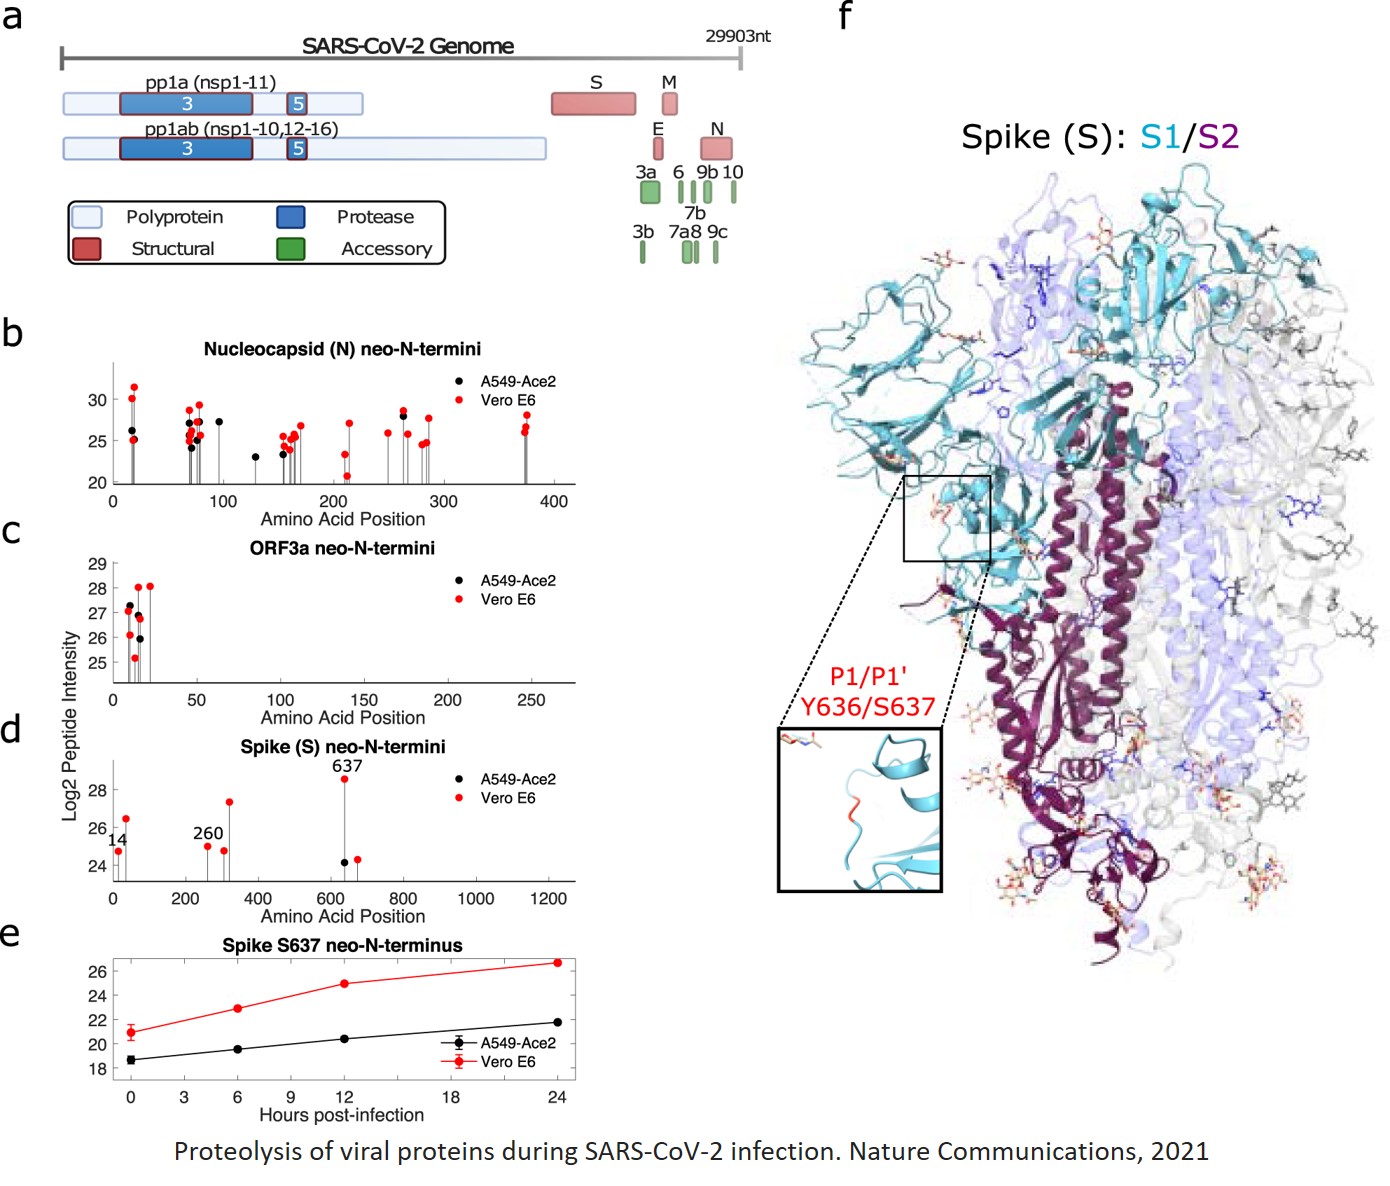 Inhibiting targets of SARS-CoV-2 proteases can block infection